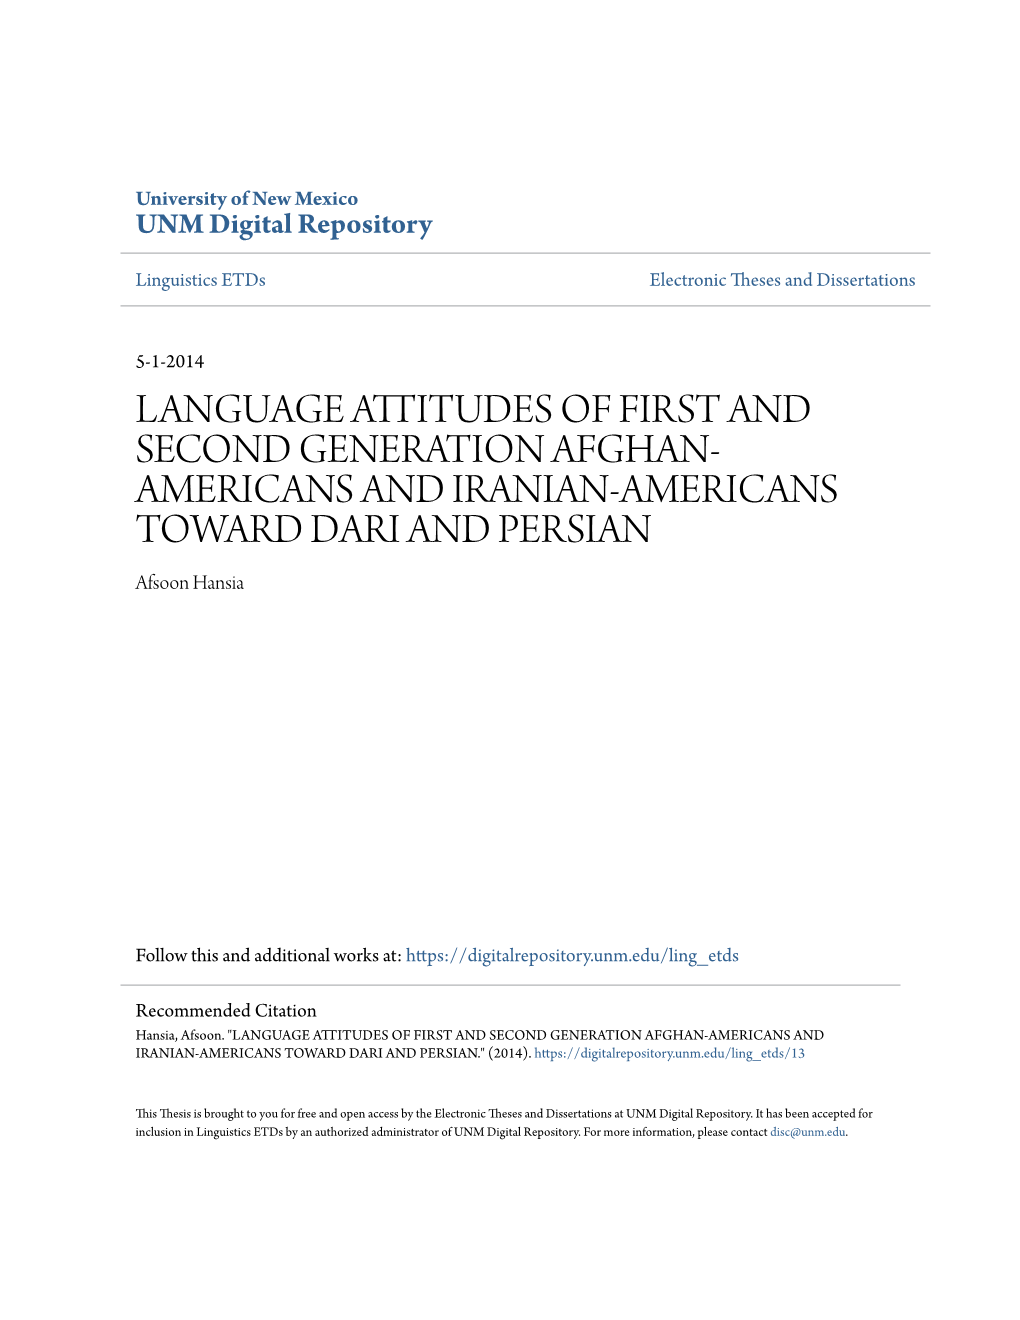 Language Attitudes of First and Second Generation Afghan-Americans and Iranian-Americans Toward Dari and Persian." (2014)